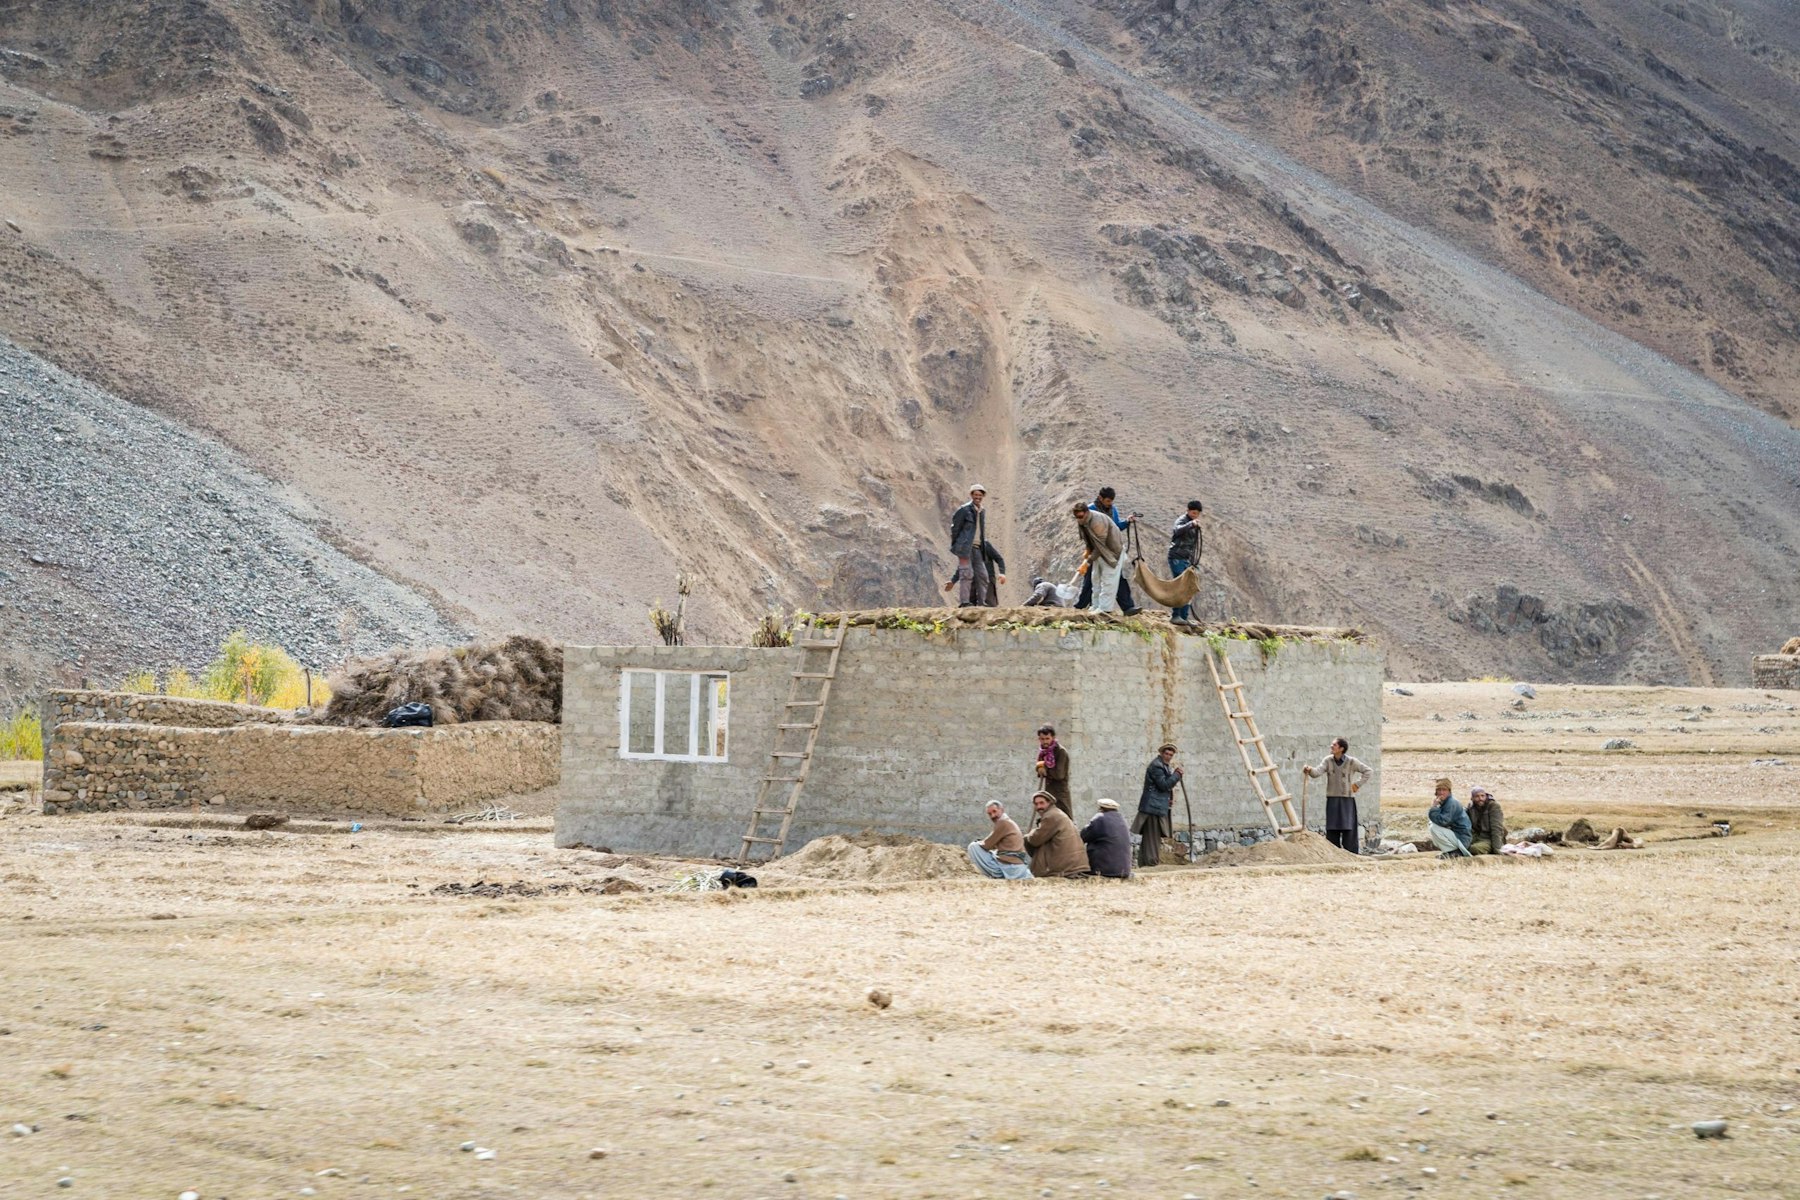 The construction of seismically stable and waterproofed infrastructure. Photo credit: AKF / Christopher Wilton-Steer